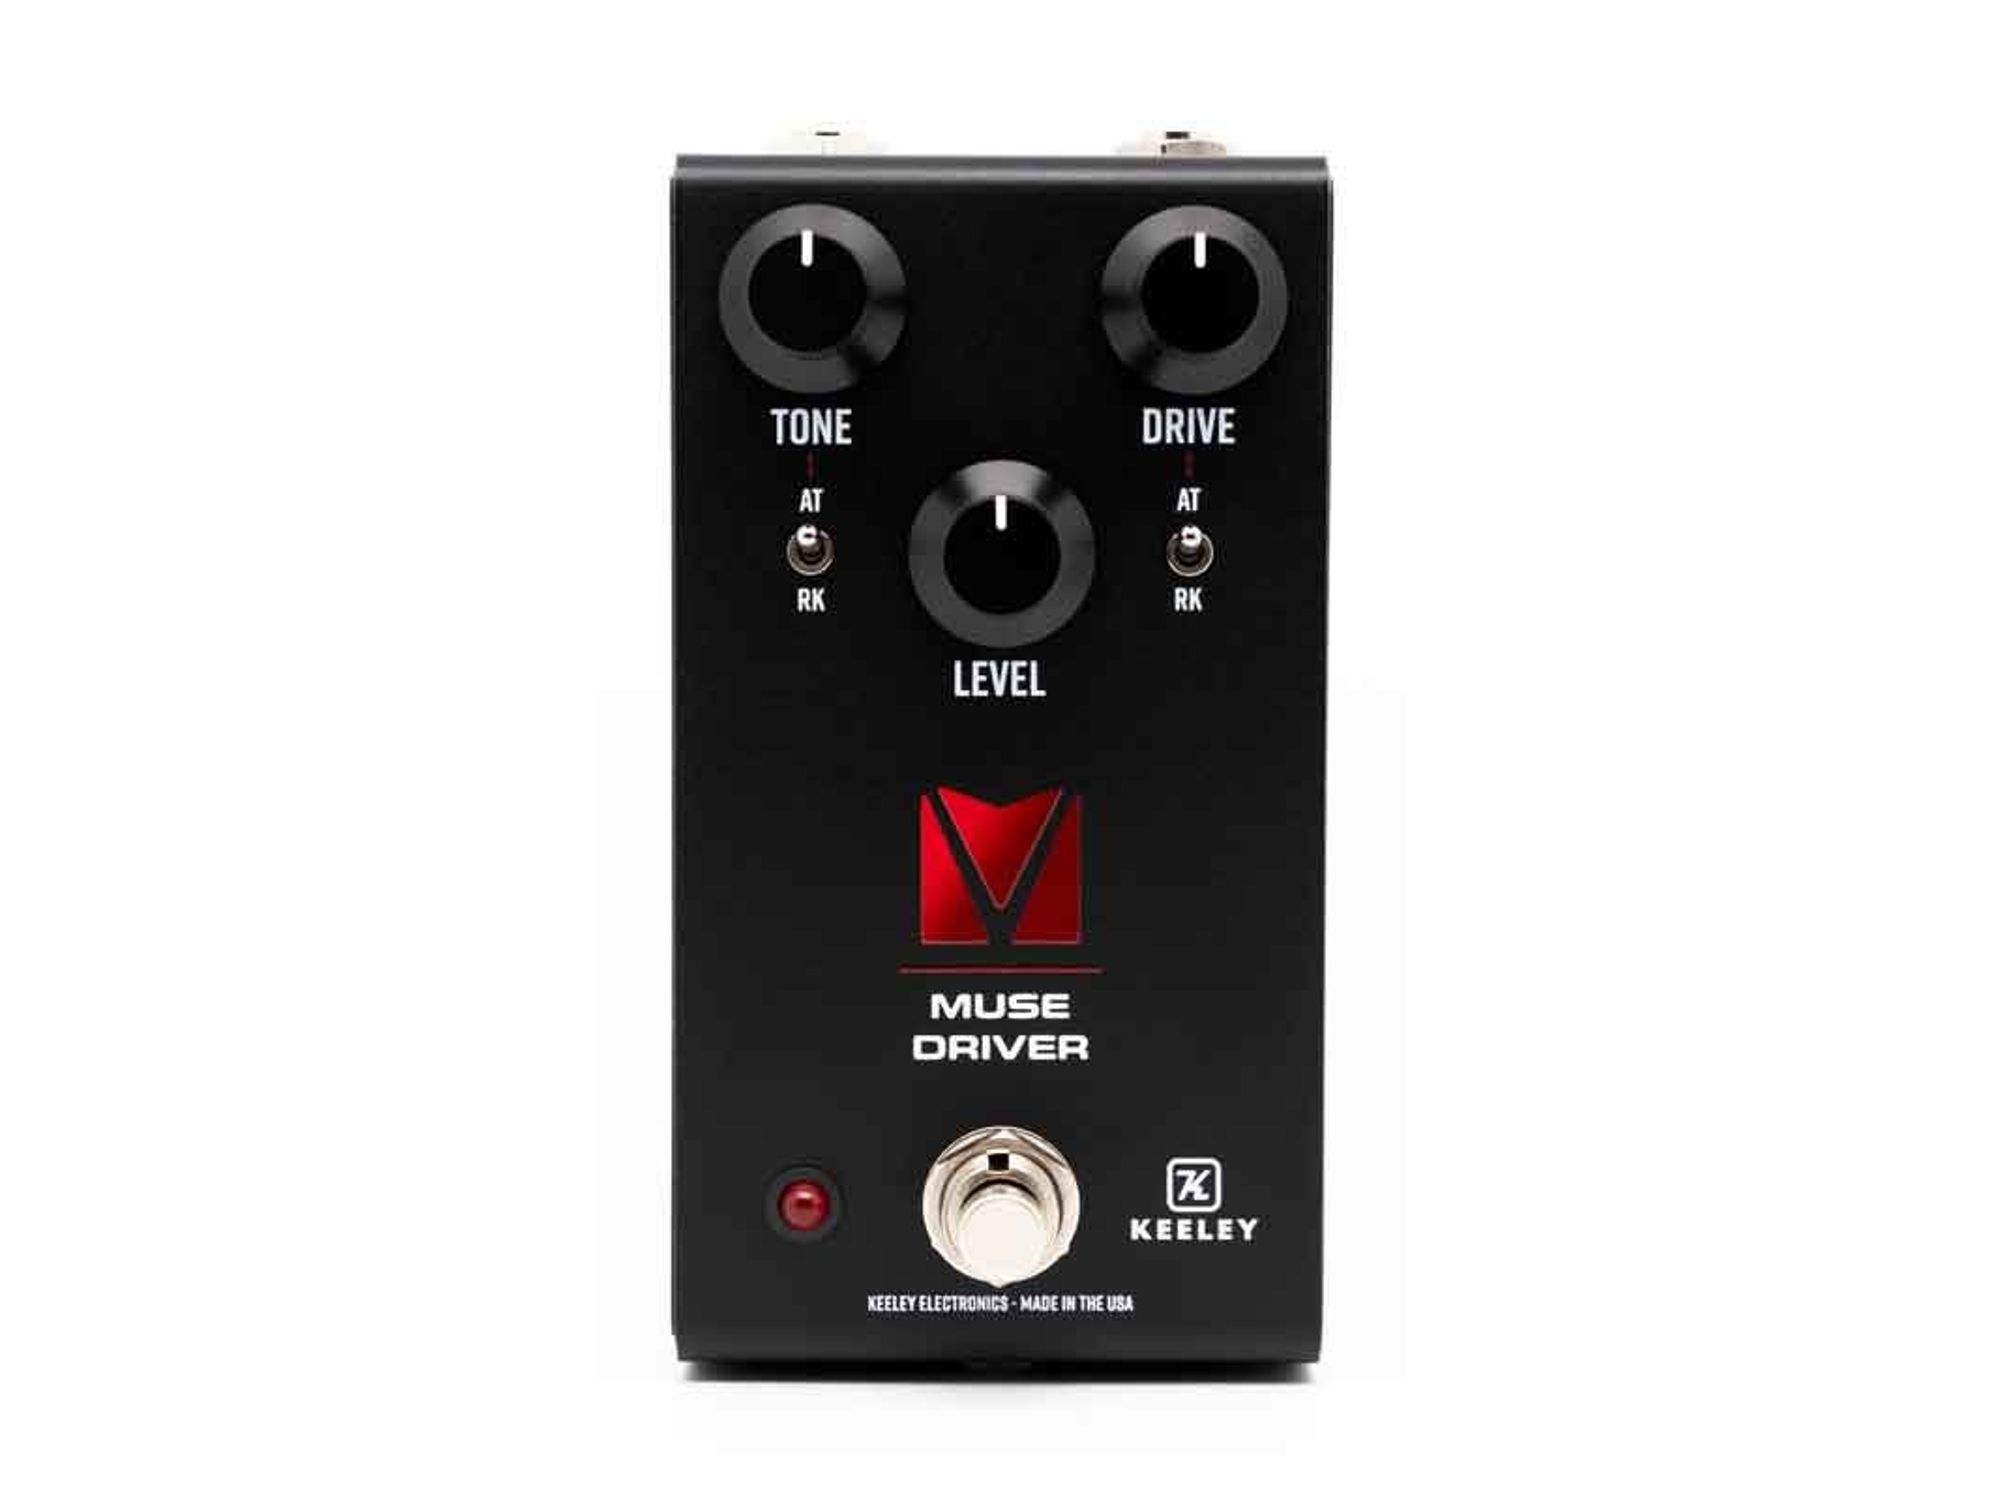 Keeley Muse Driver pedal